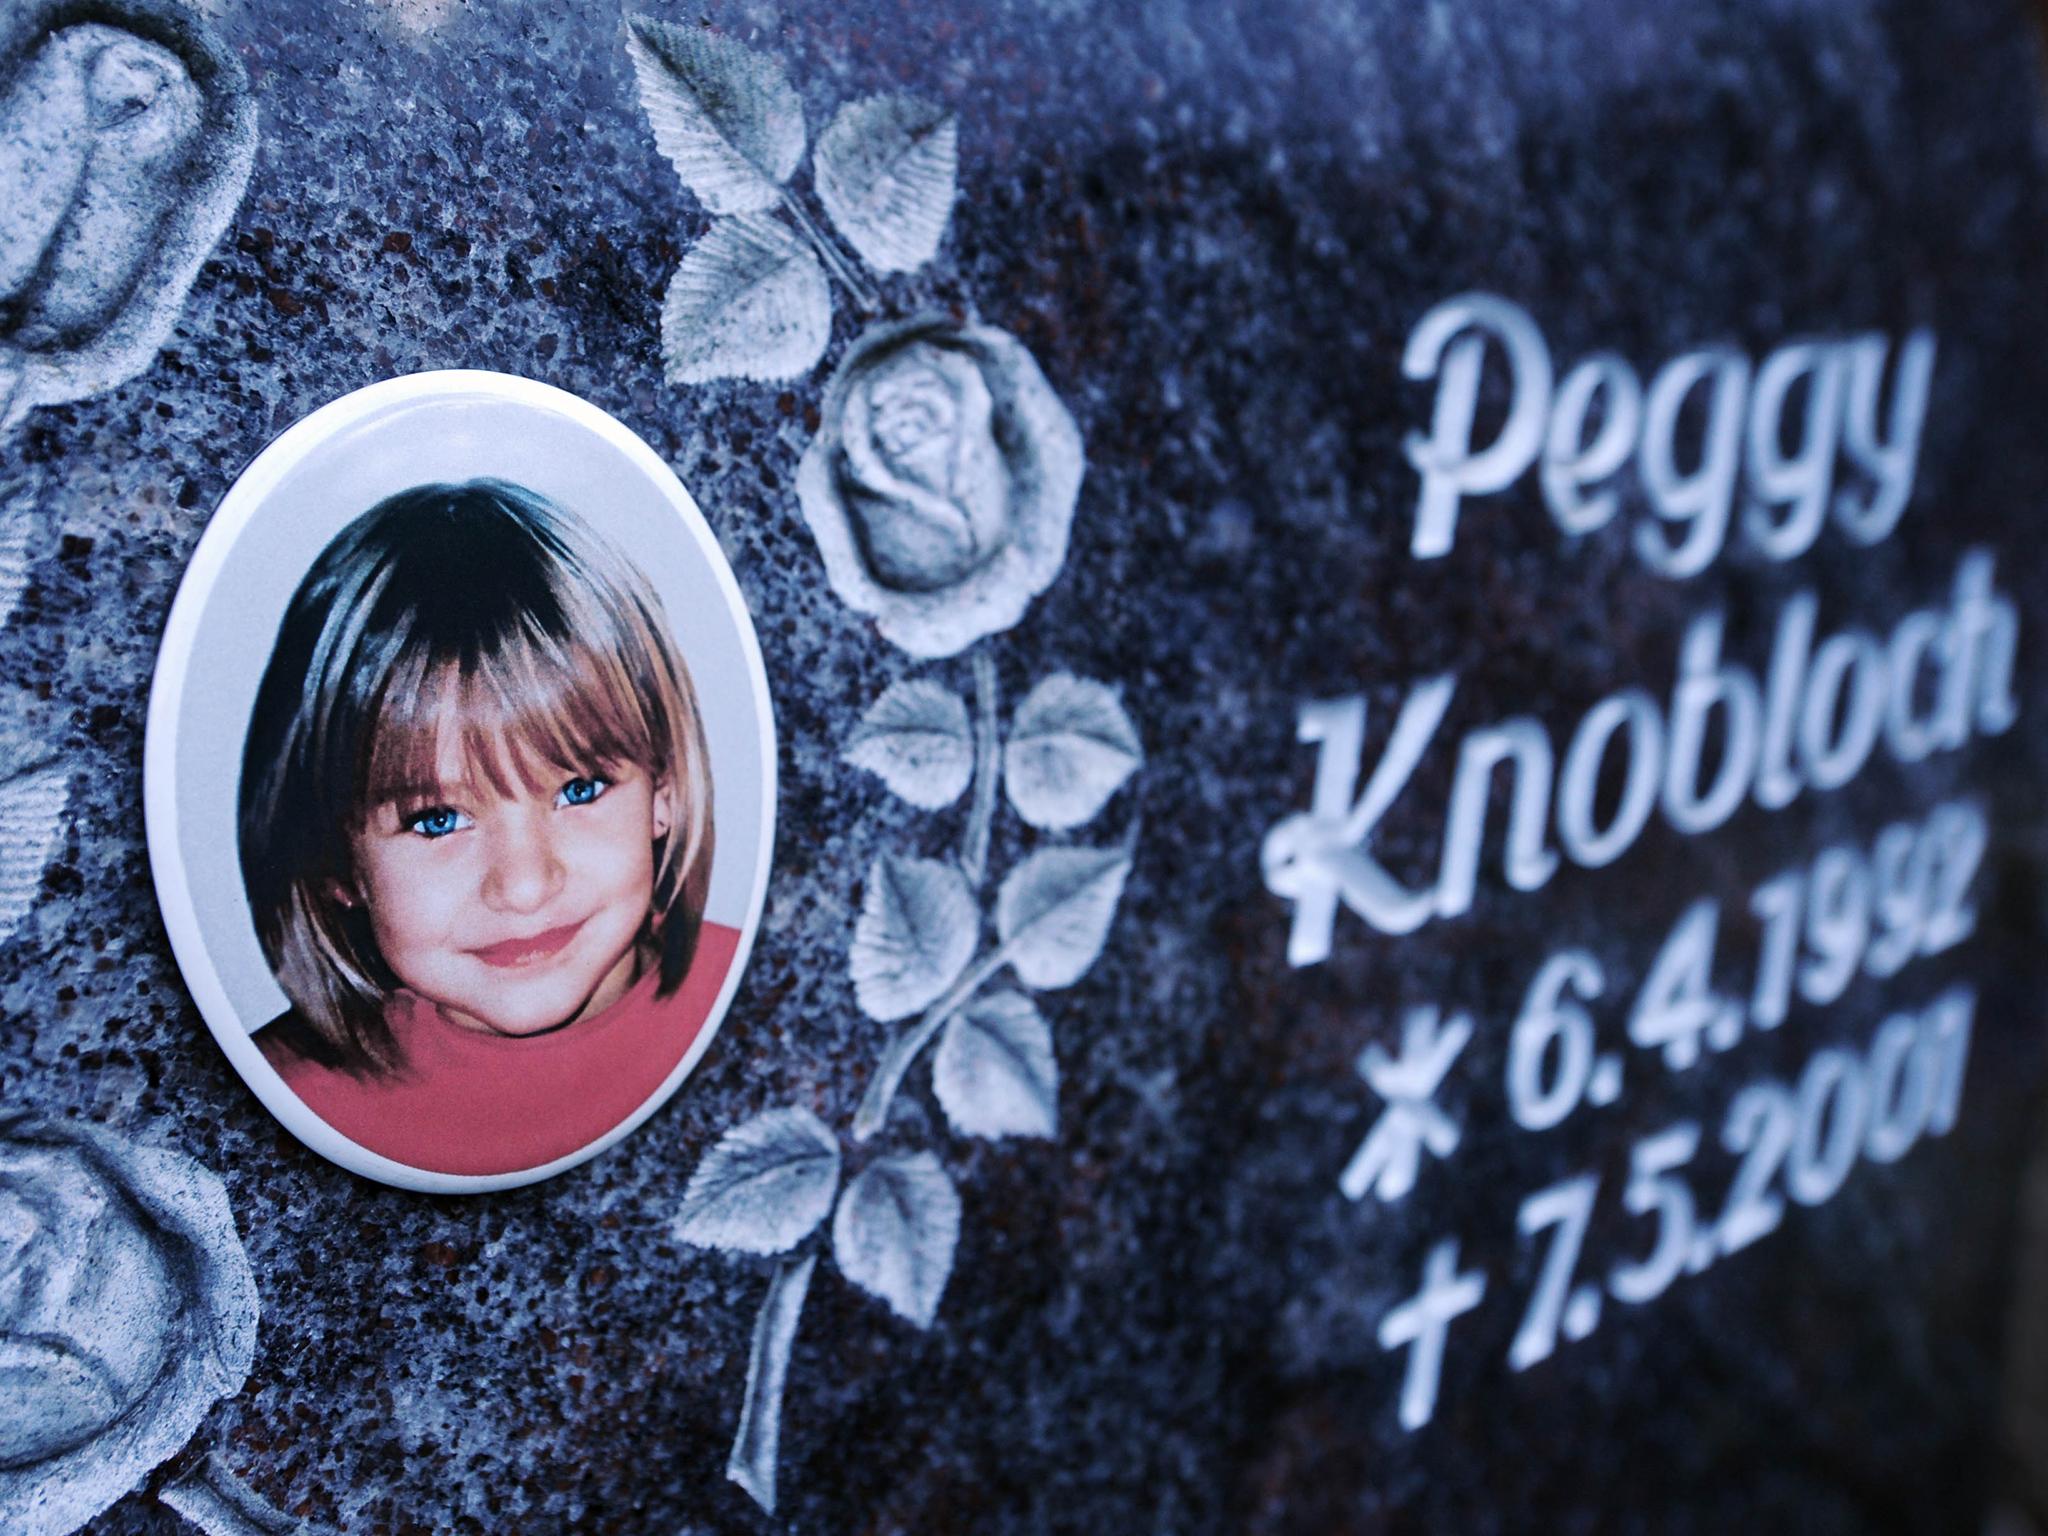 Police in Bavaria have confirmed the remains of Peggy Knobloch have been found